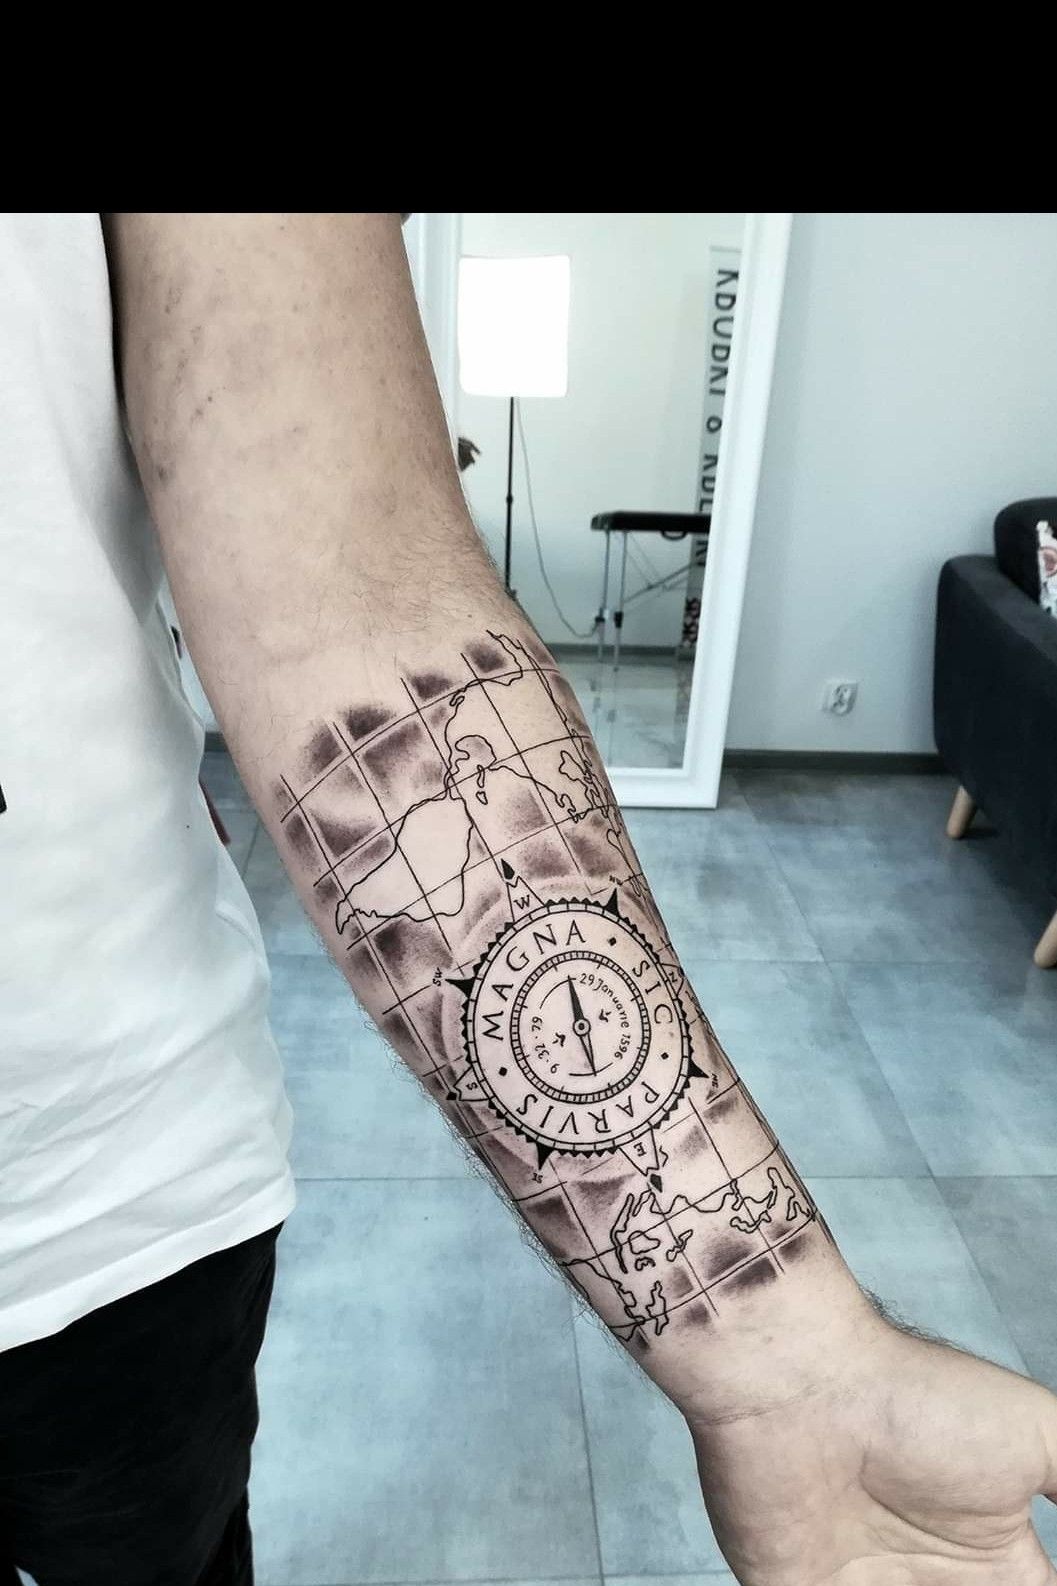 Membalas 00dudus00 one of most requested uncharted unchartedtattoo    2309K Views  TikTok